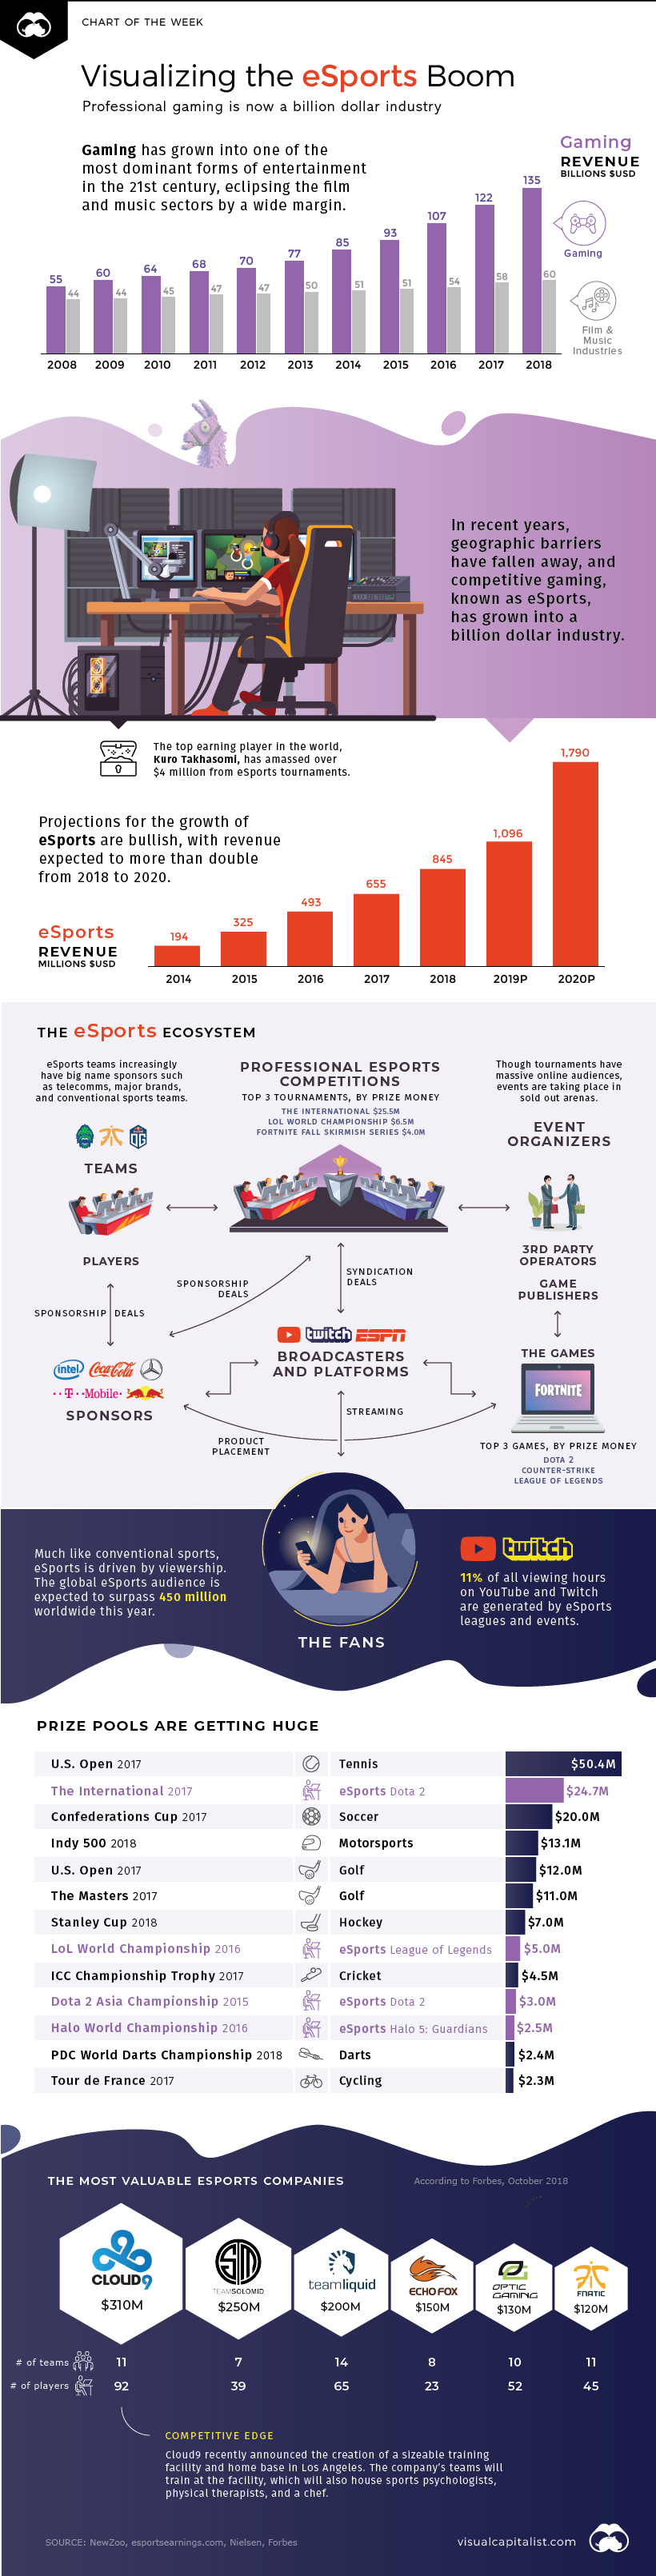 Visualizing the eSports Boom, and the Numbers Behind Its Explosive Growth